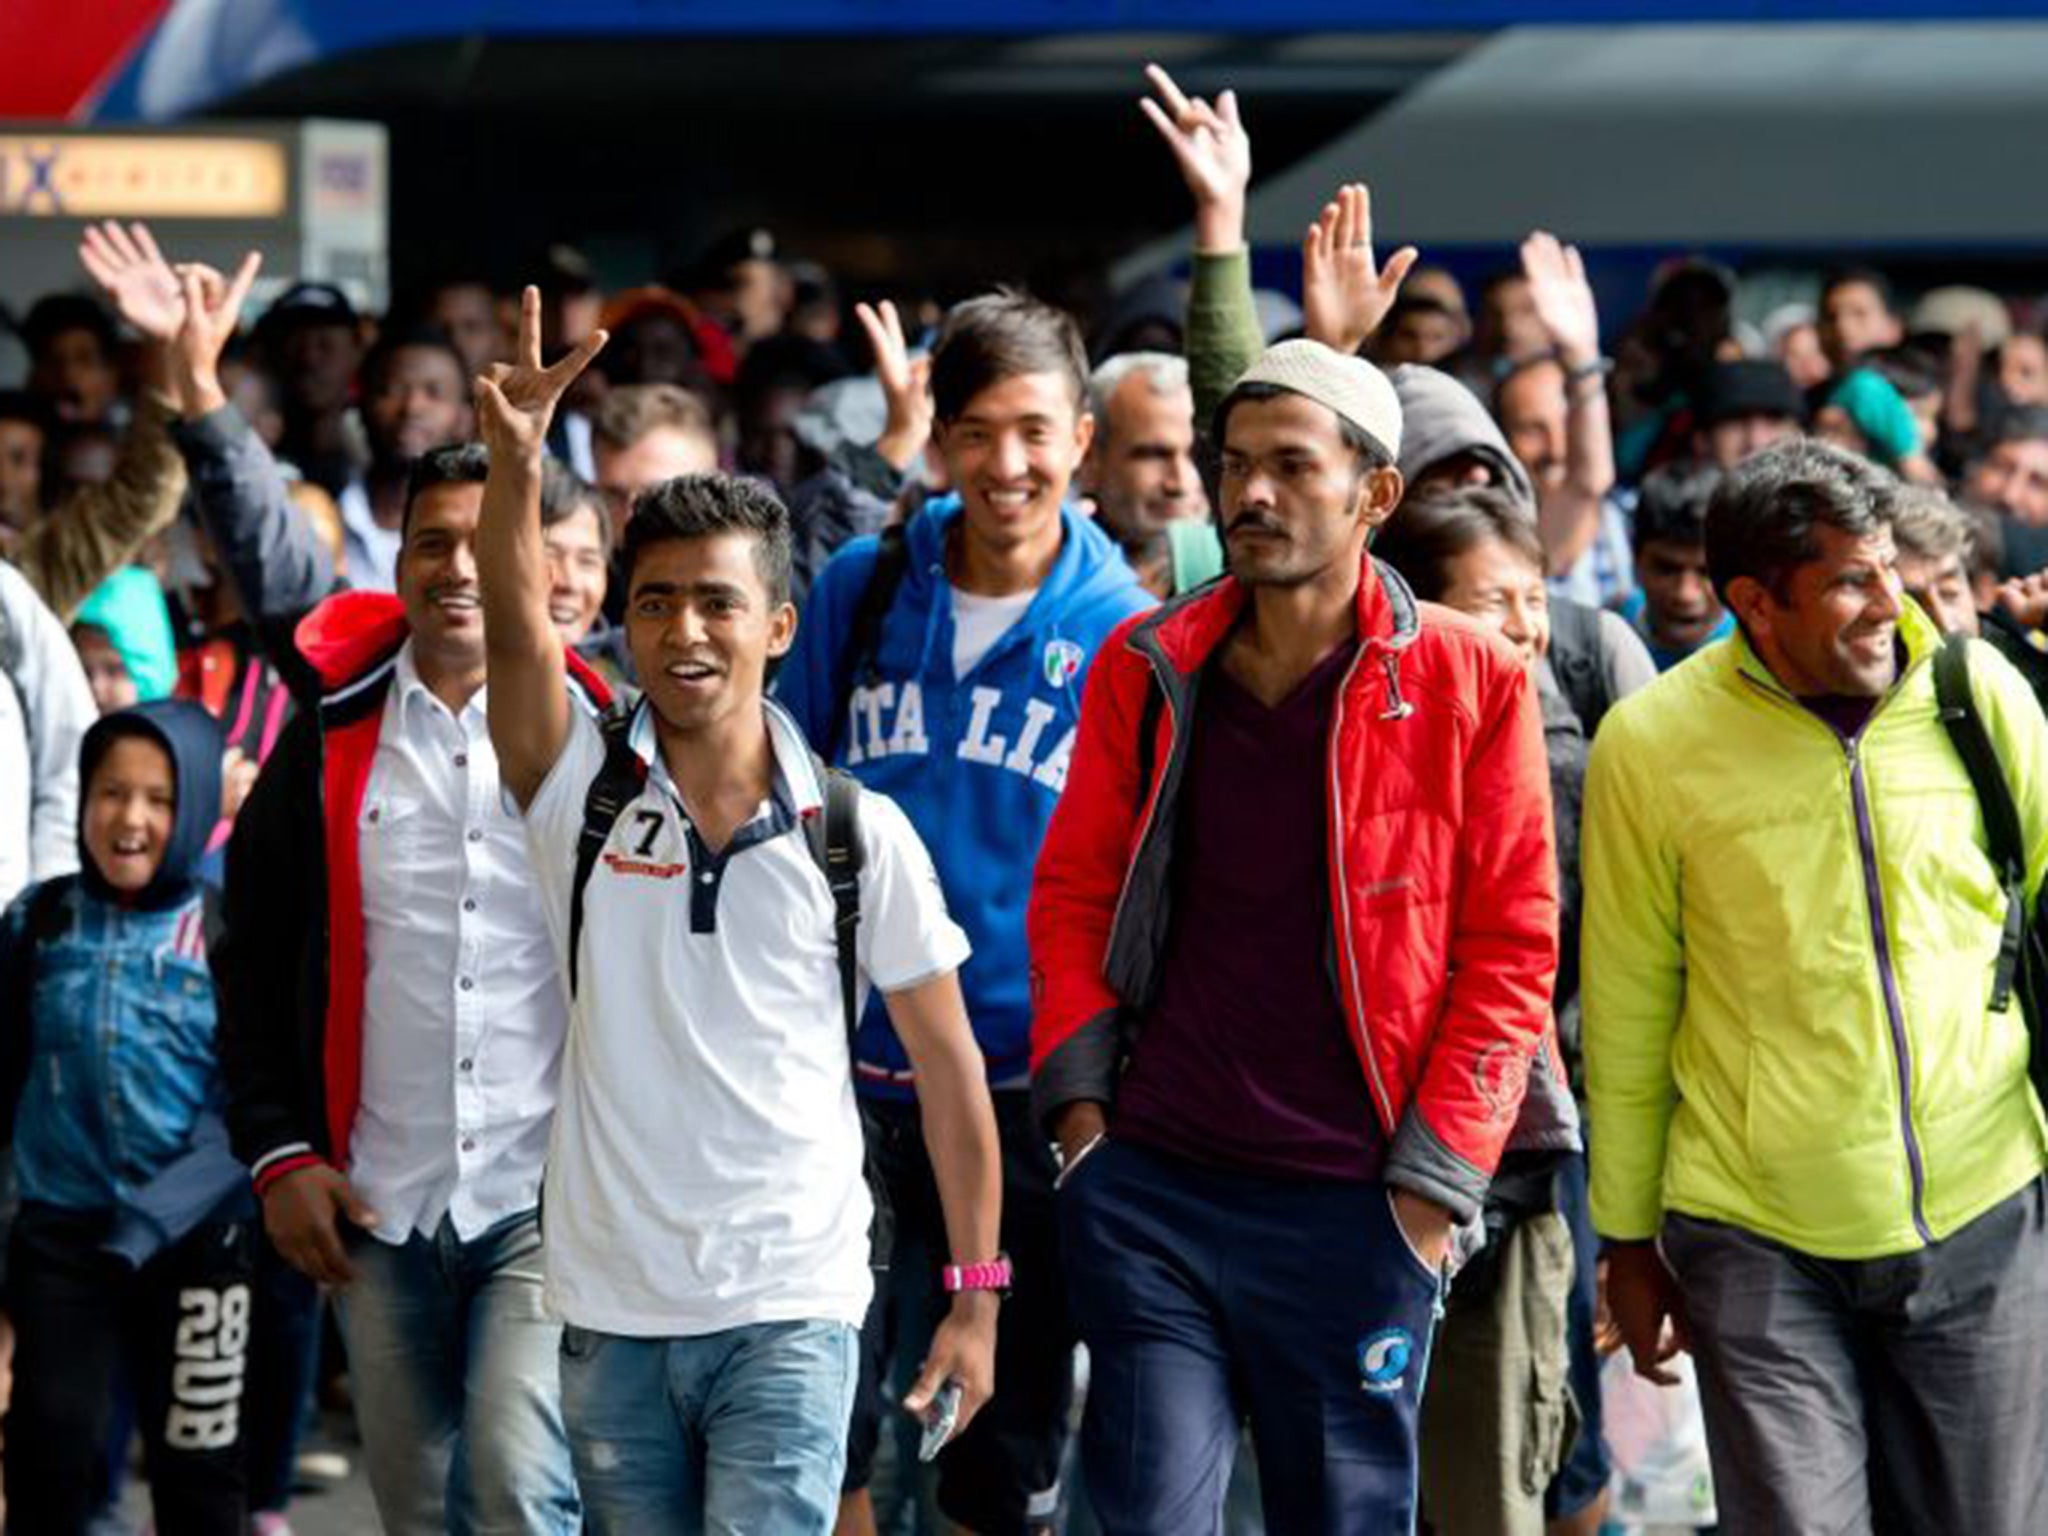 Refugees cheer as they arrive at the main train station in Munich, Germany, 06 September 2015